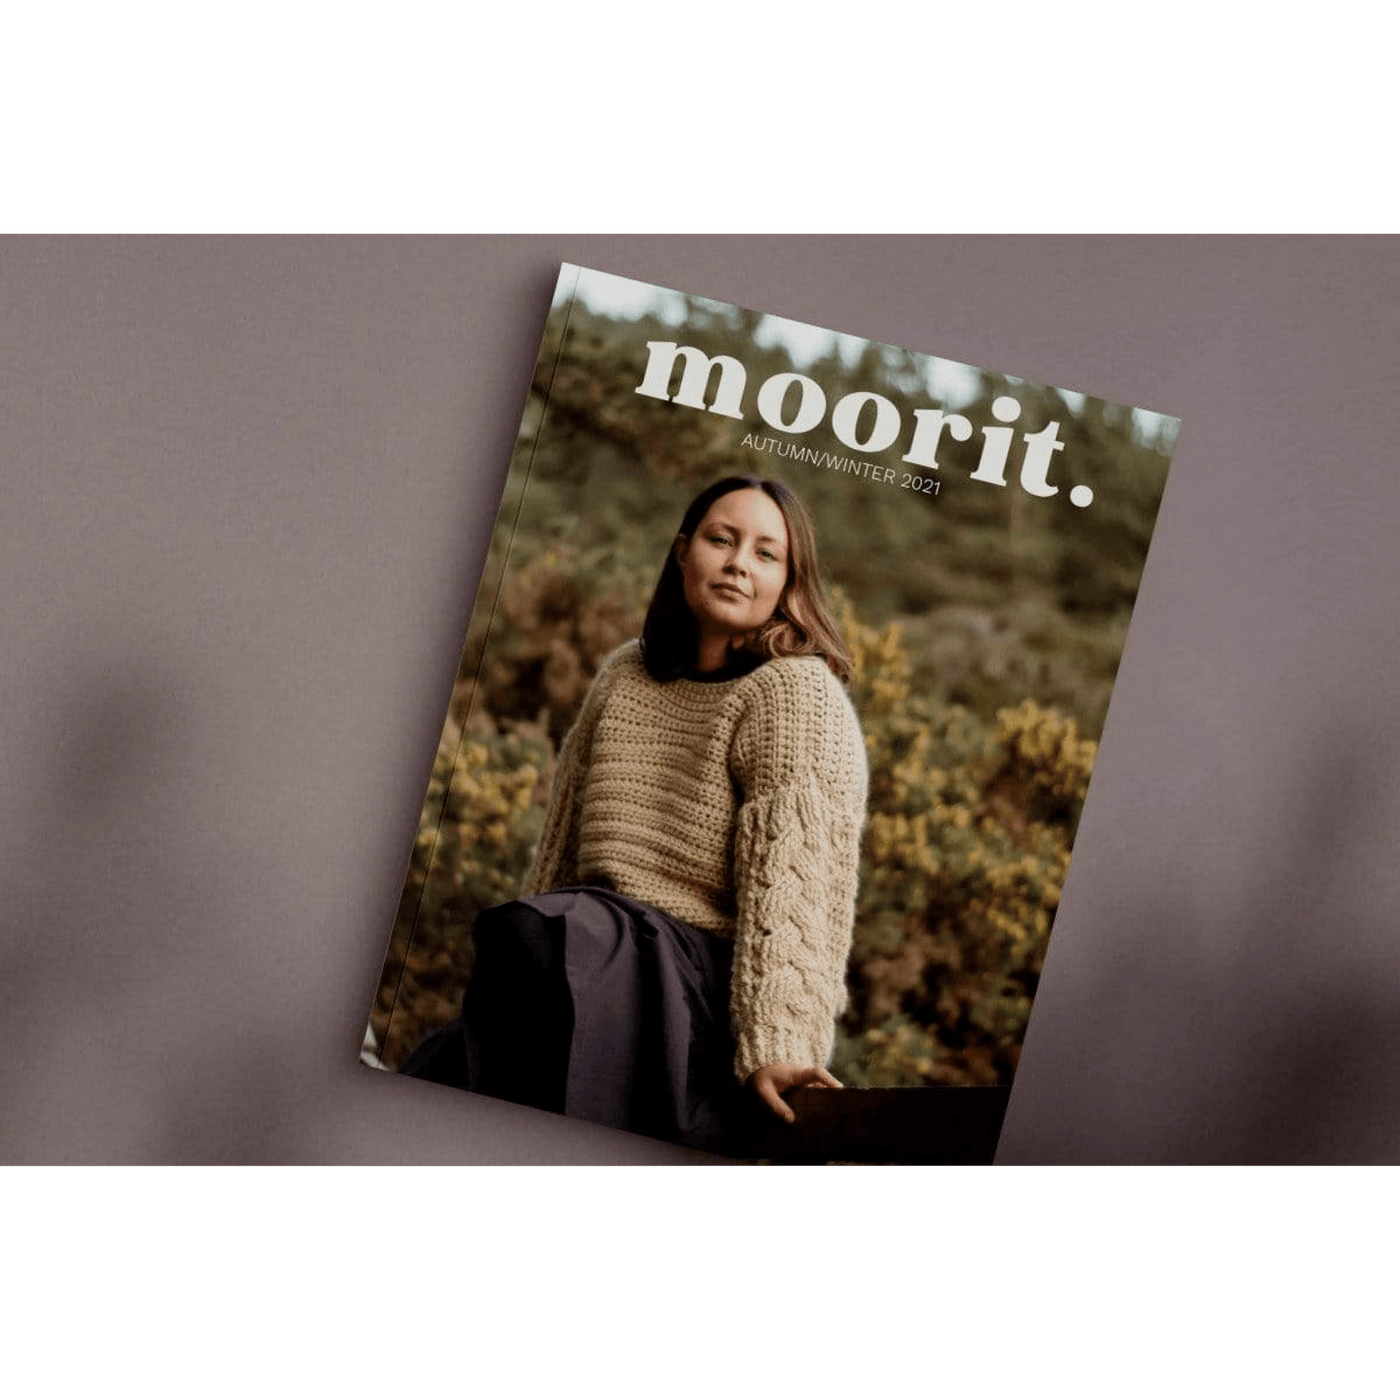 The Woolly Thistle Moorit Magazine - Issue 1 Autumn/Winter 2021 image from magazine showing cover with woman wearing beige knitted sweater